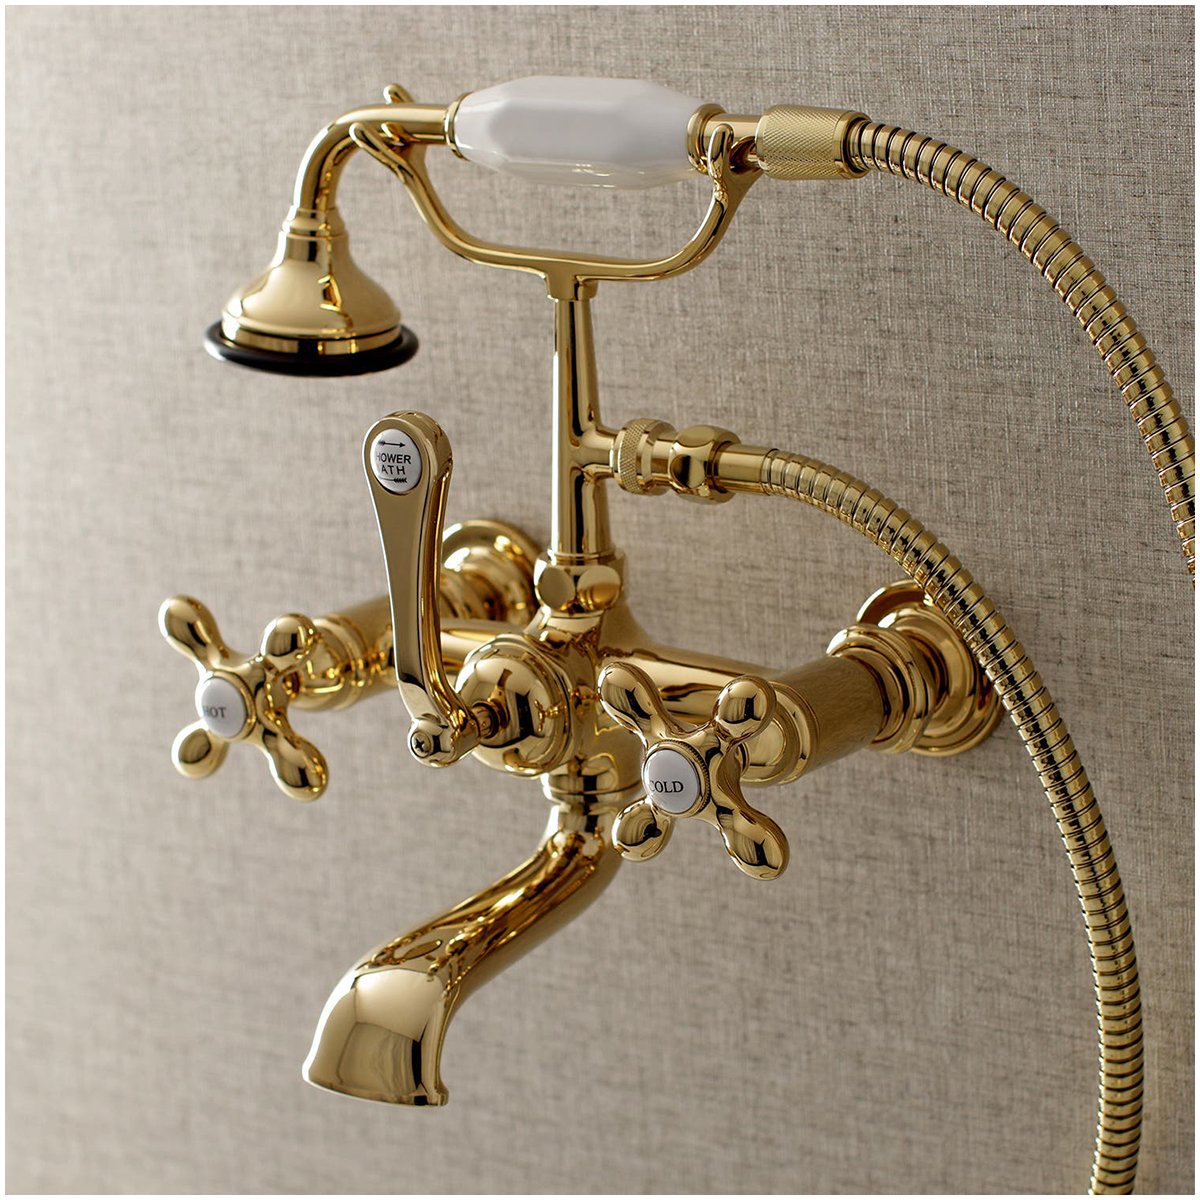 Kingston Brass AE557TX-P Aqua Vintage 7-Inch Wall Mount Tub Faucet with Hand Shower